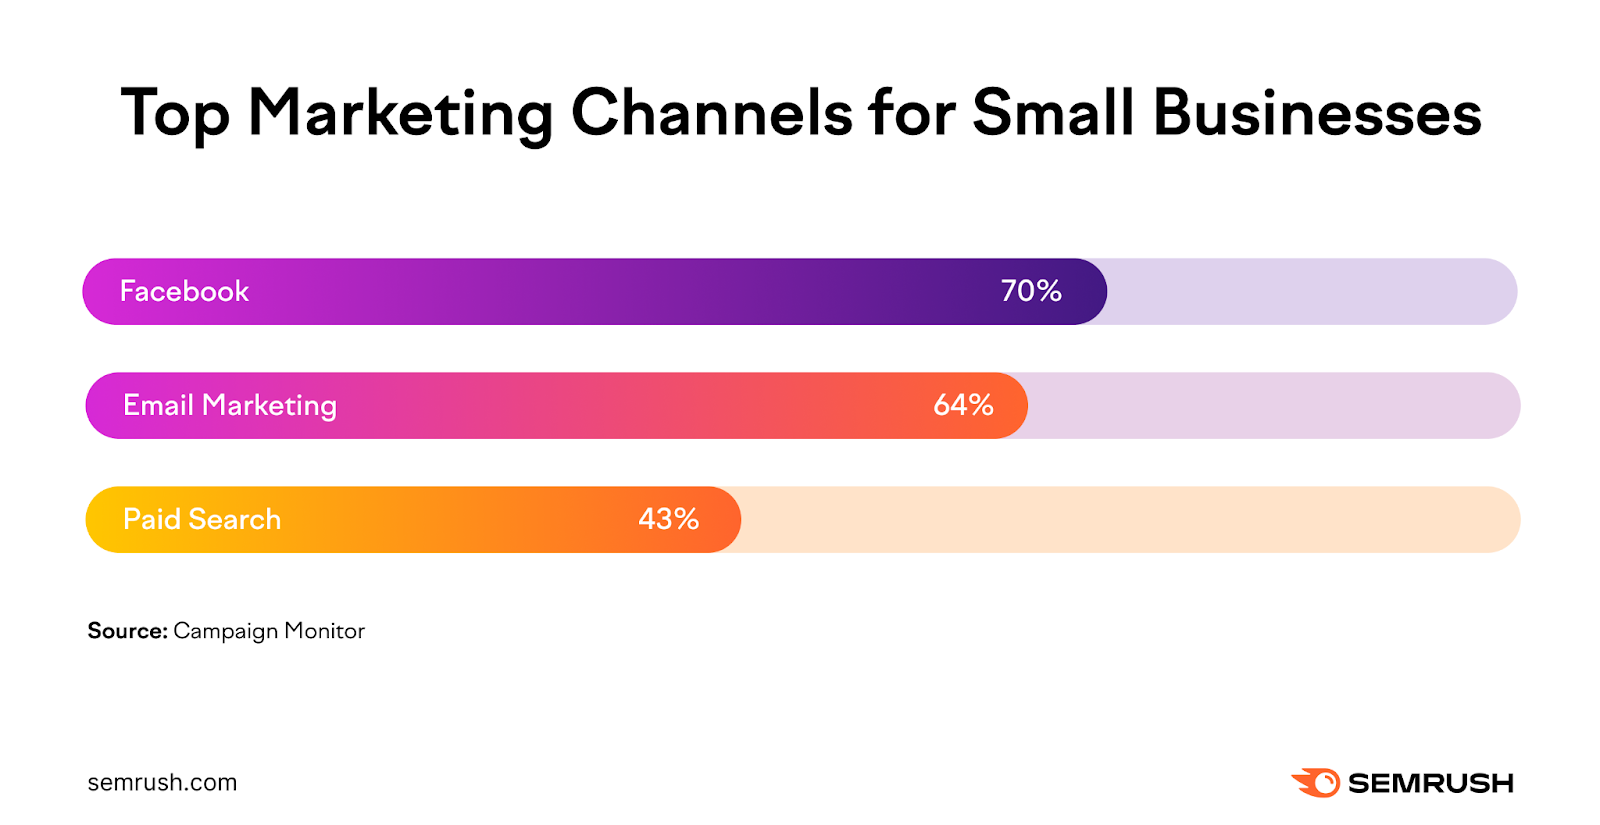 Top marketing channels for small businesses